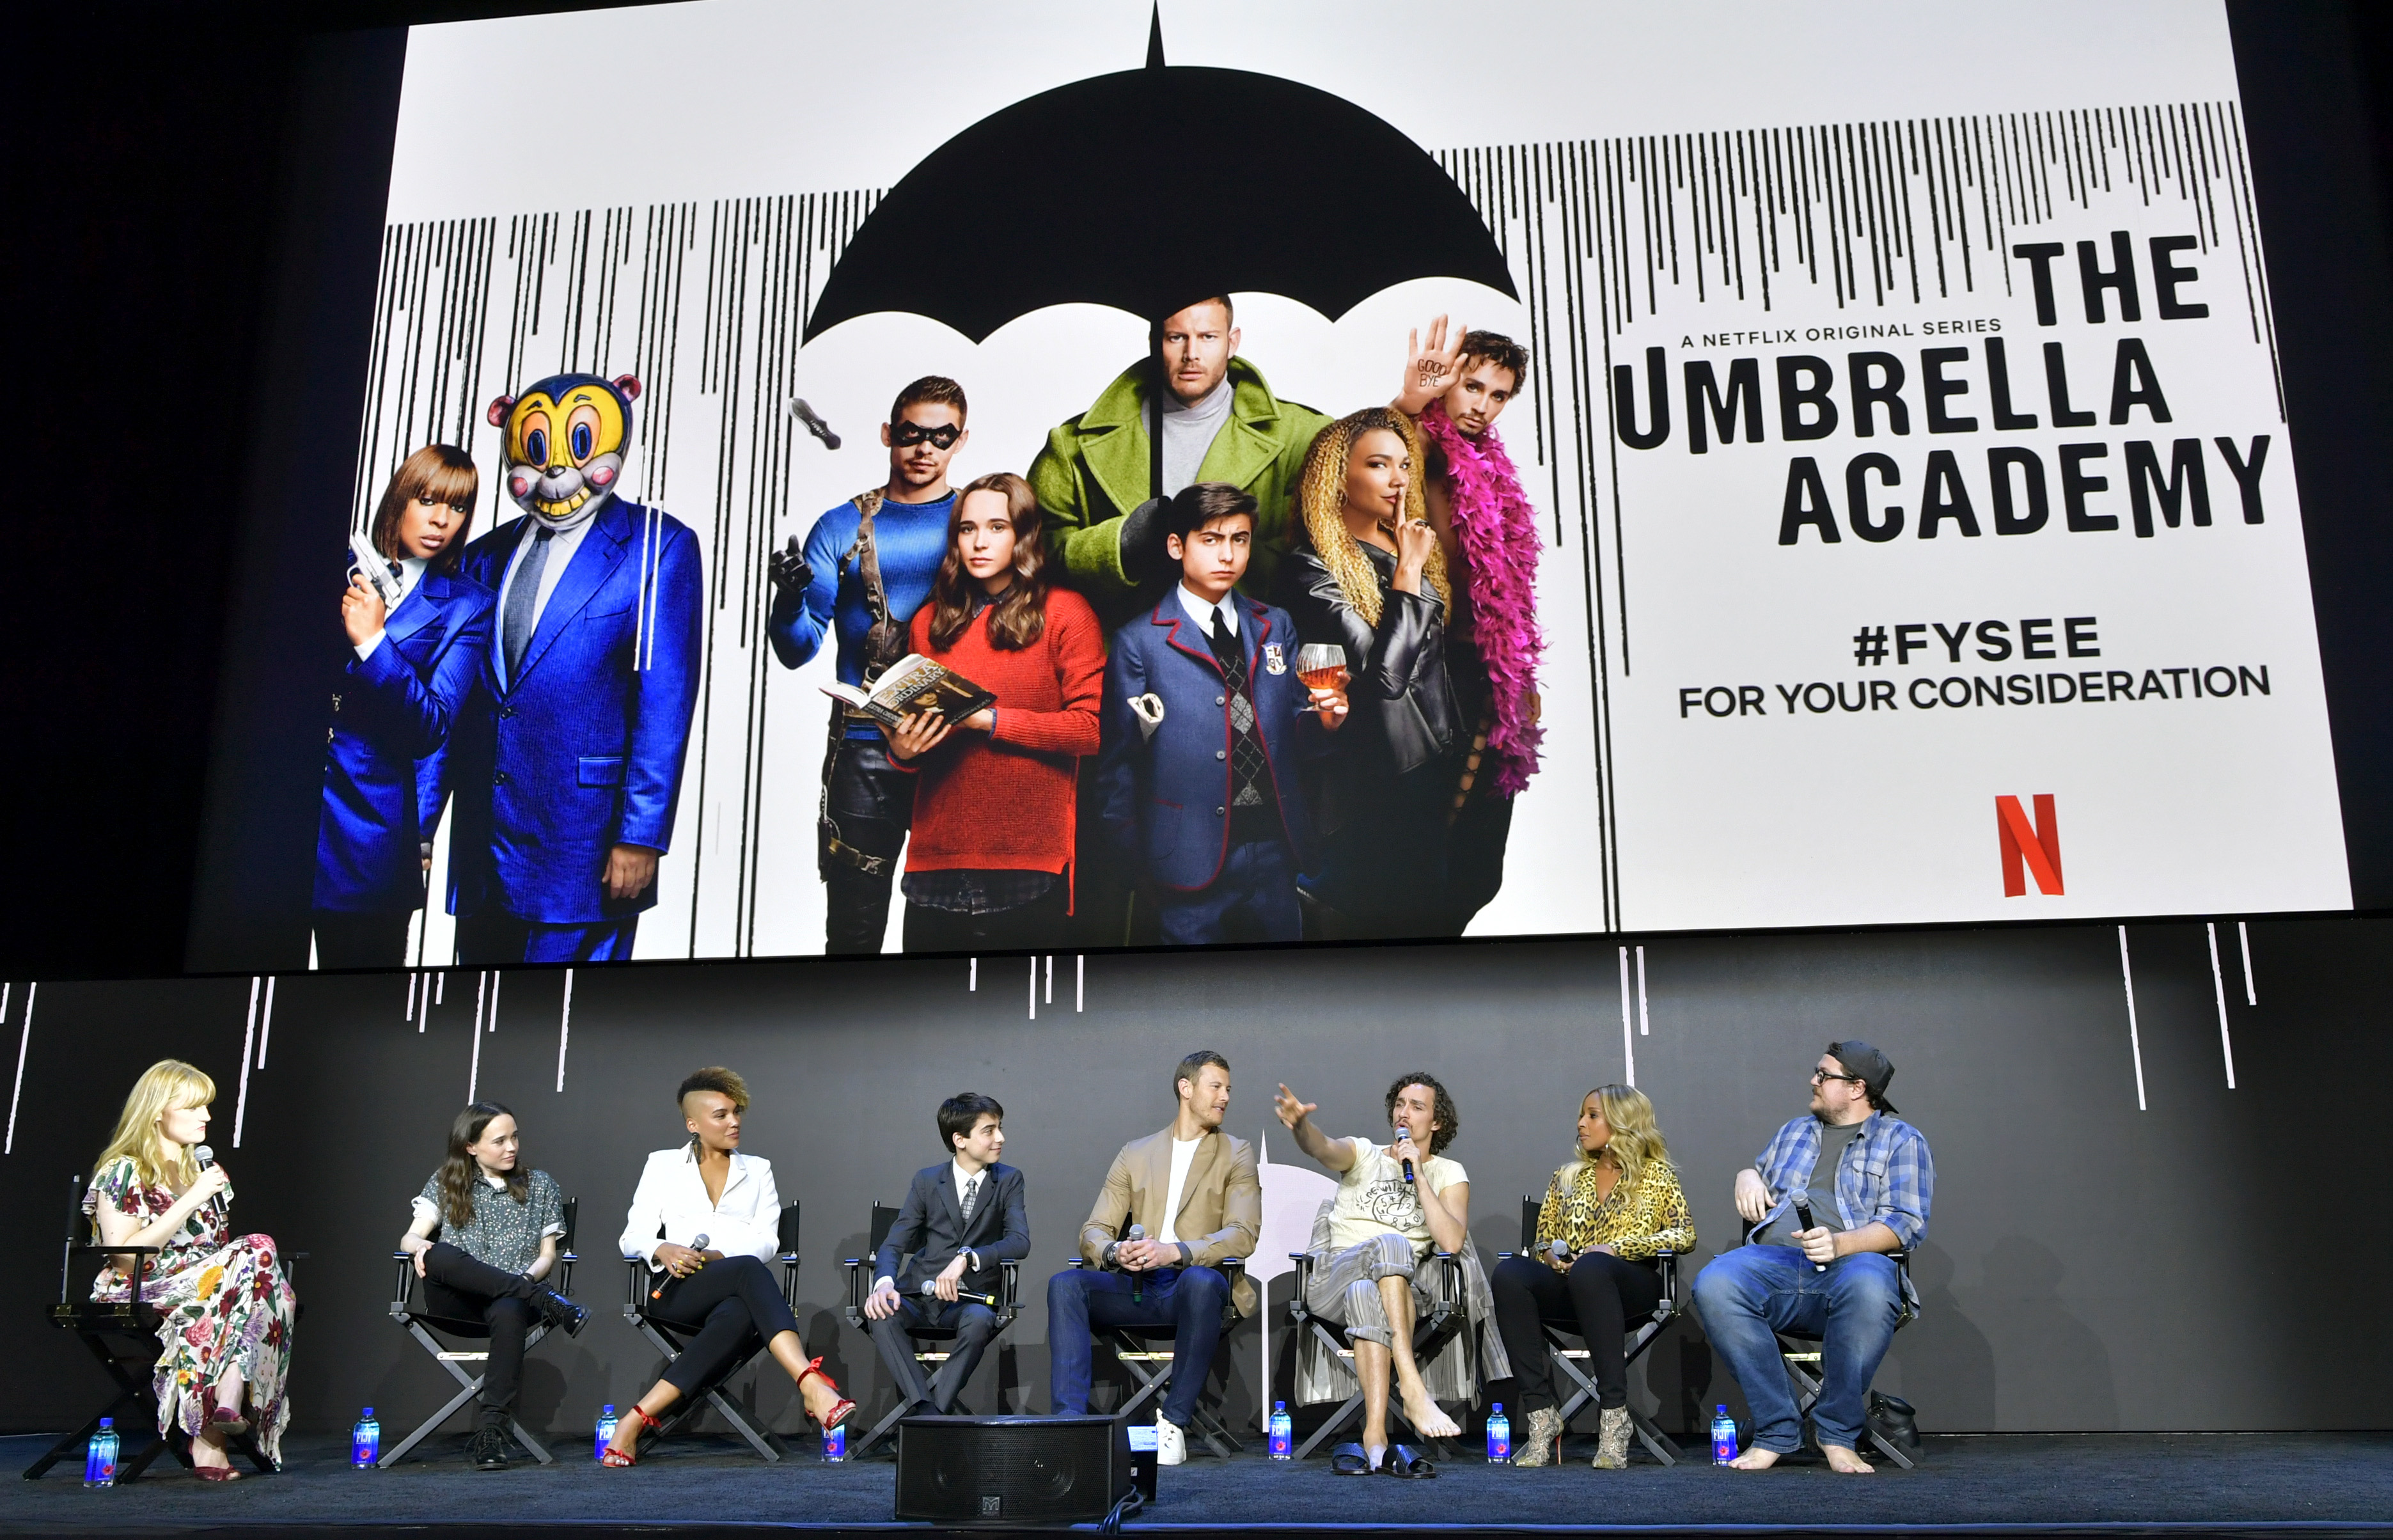 The actors from 'Umbrella Academy' speaking at an event